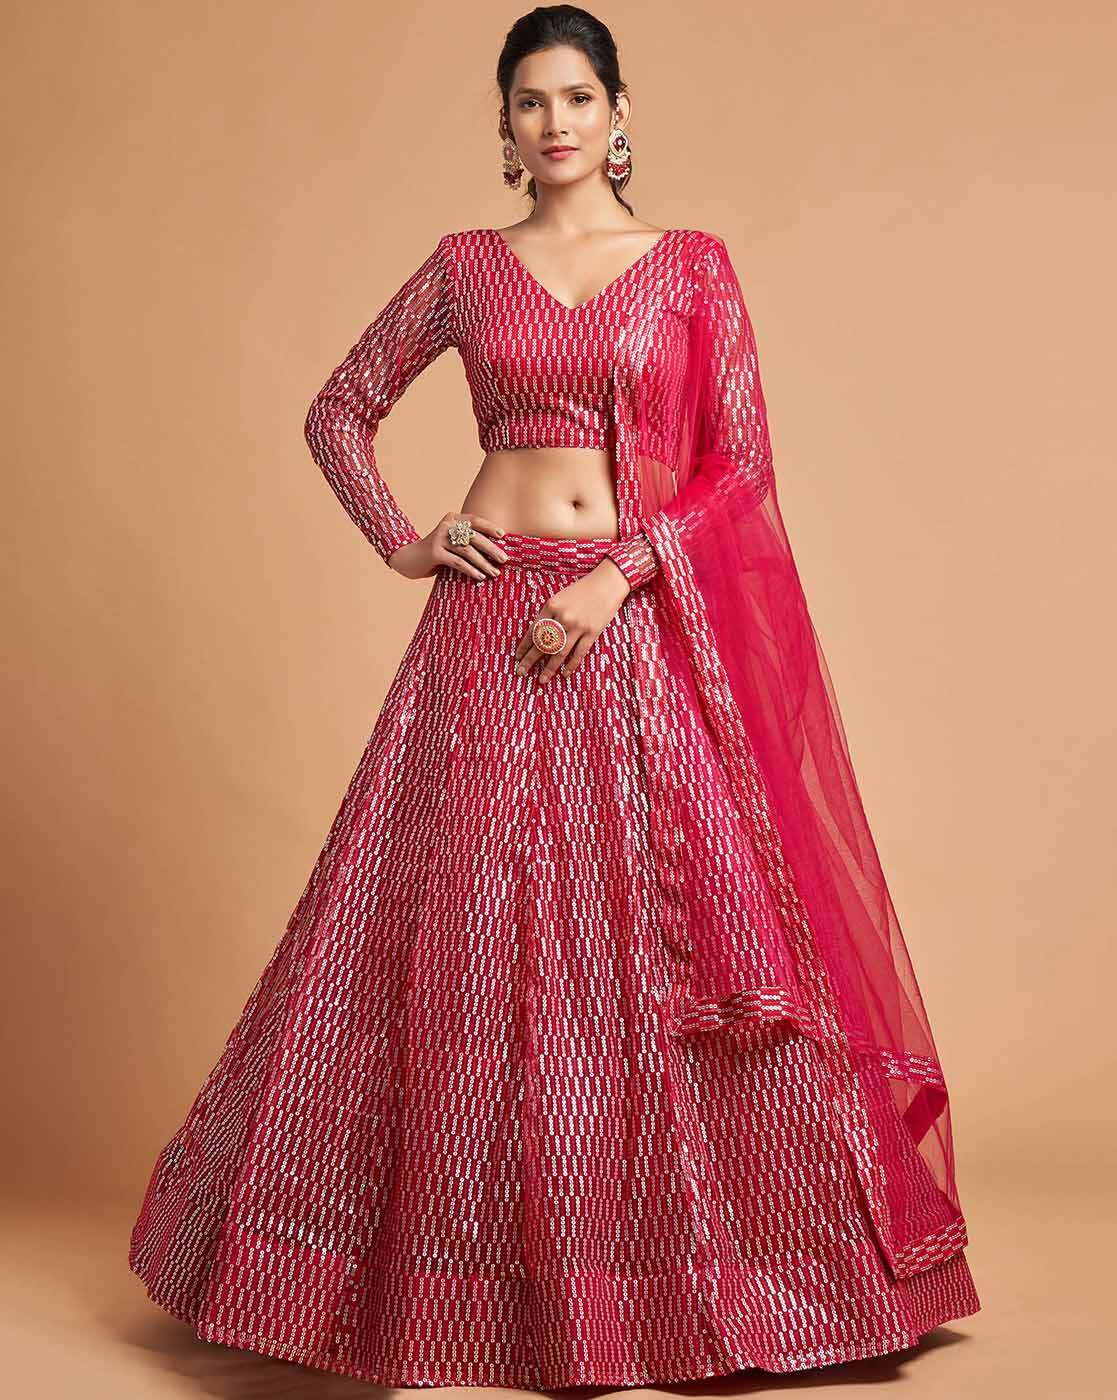 Here 😍 Multicolour Lehenga Cholies Under 1000 from Amazon | Amazon Great  Indian Sale Diwali | Lehenga collection, Dresses with sleeves, Fashion